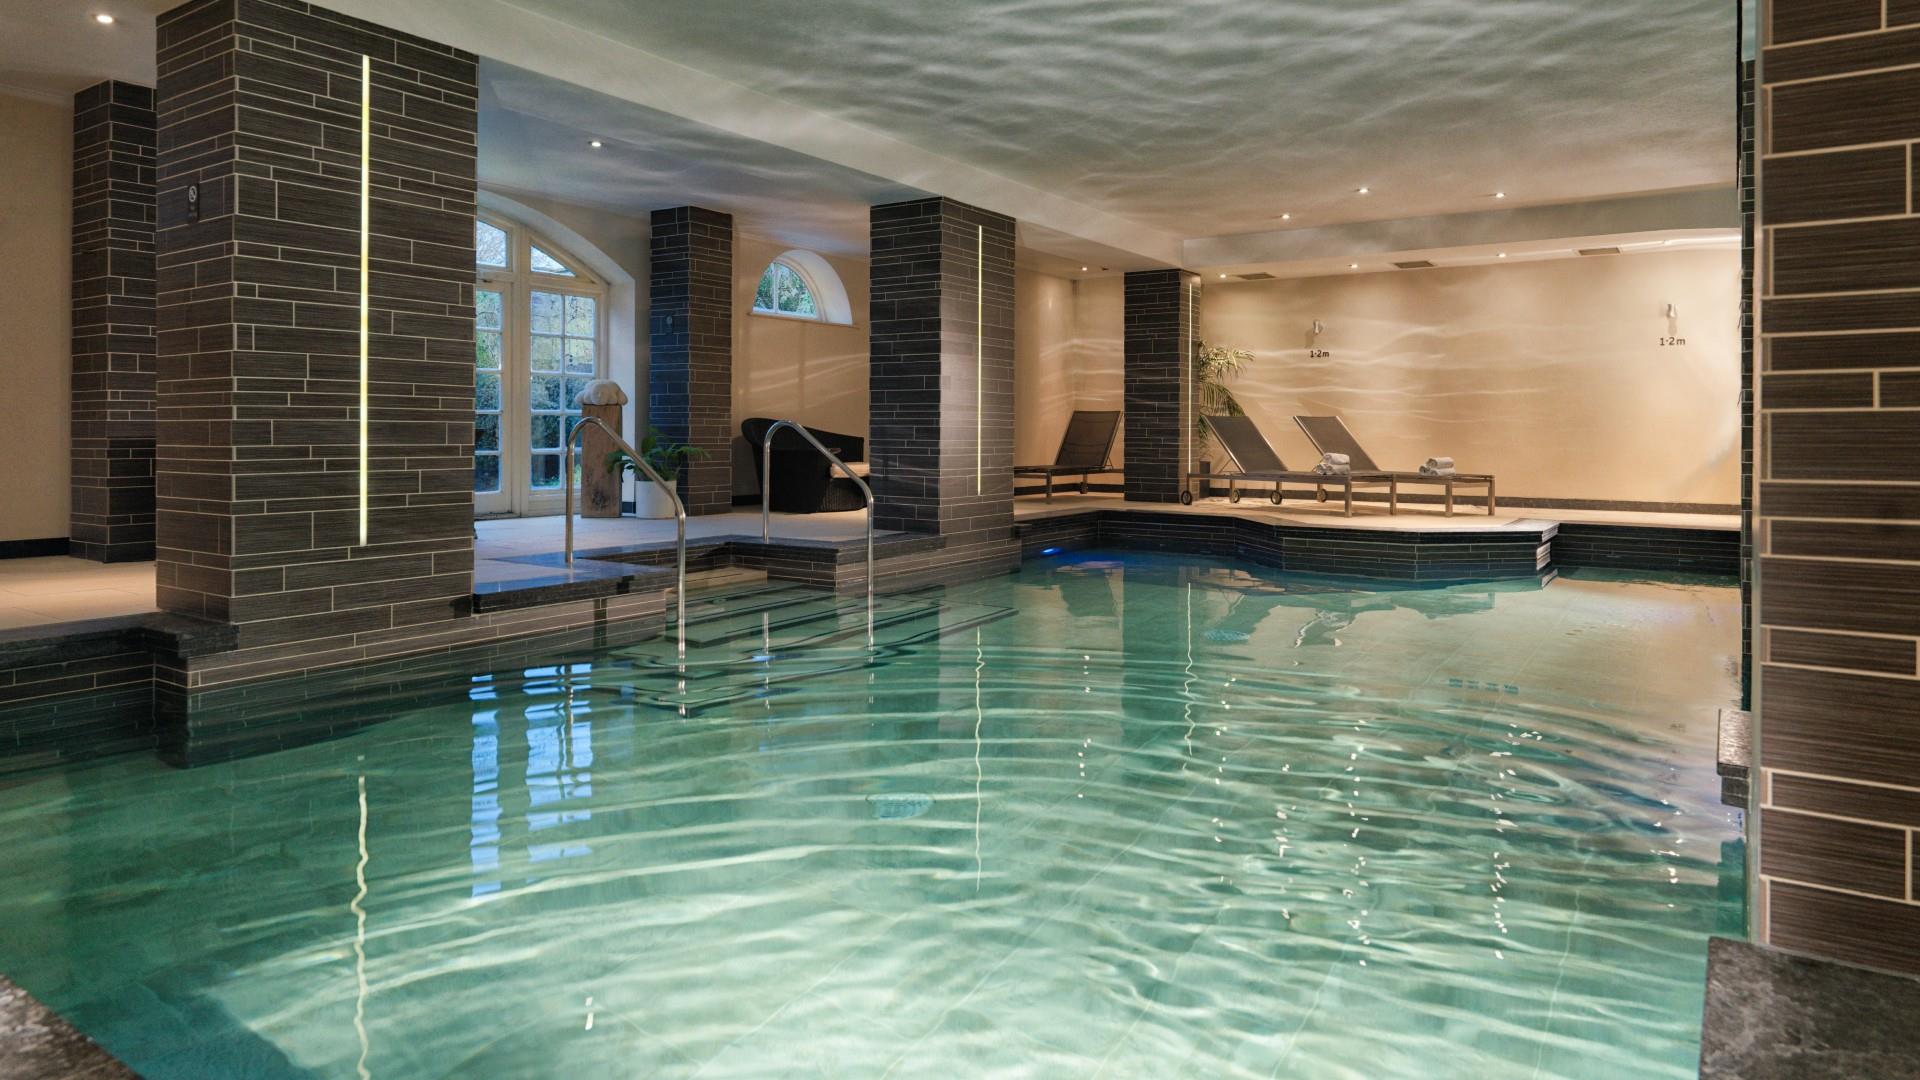 The indoor pool at The Garden Spa by L'occitane at The Bath Priory